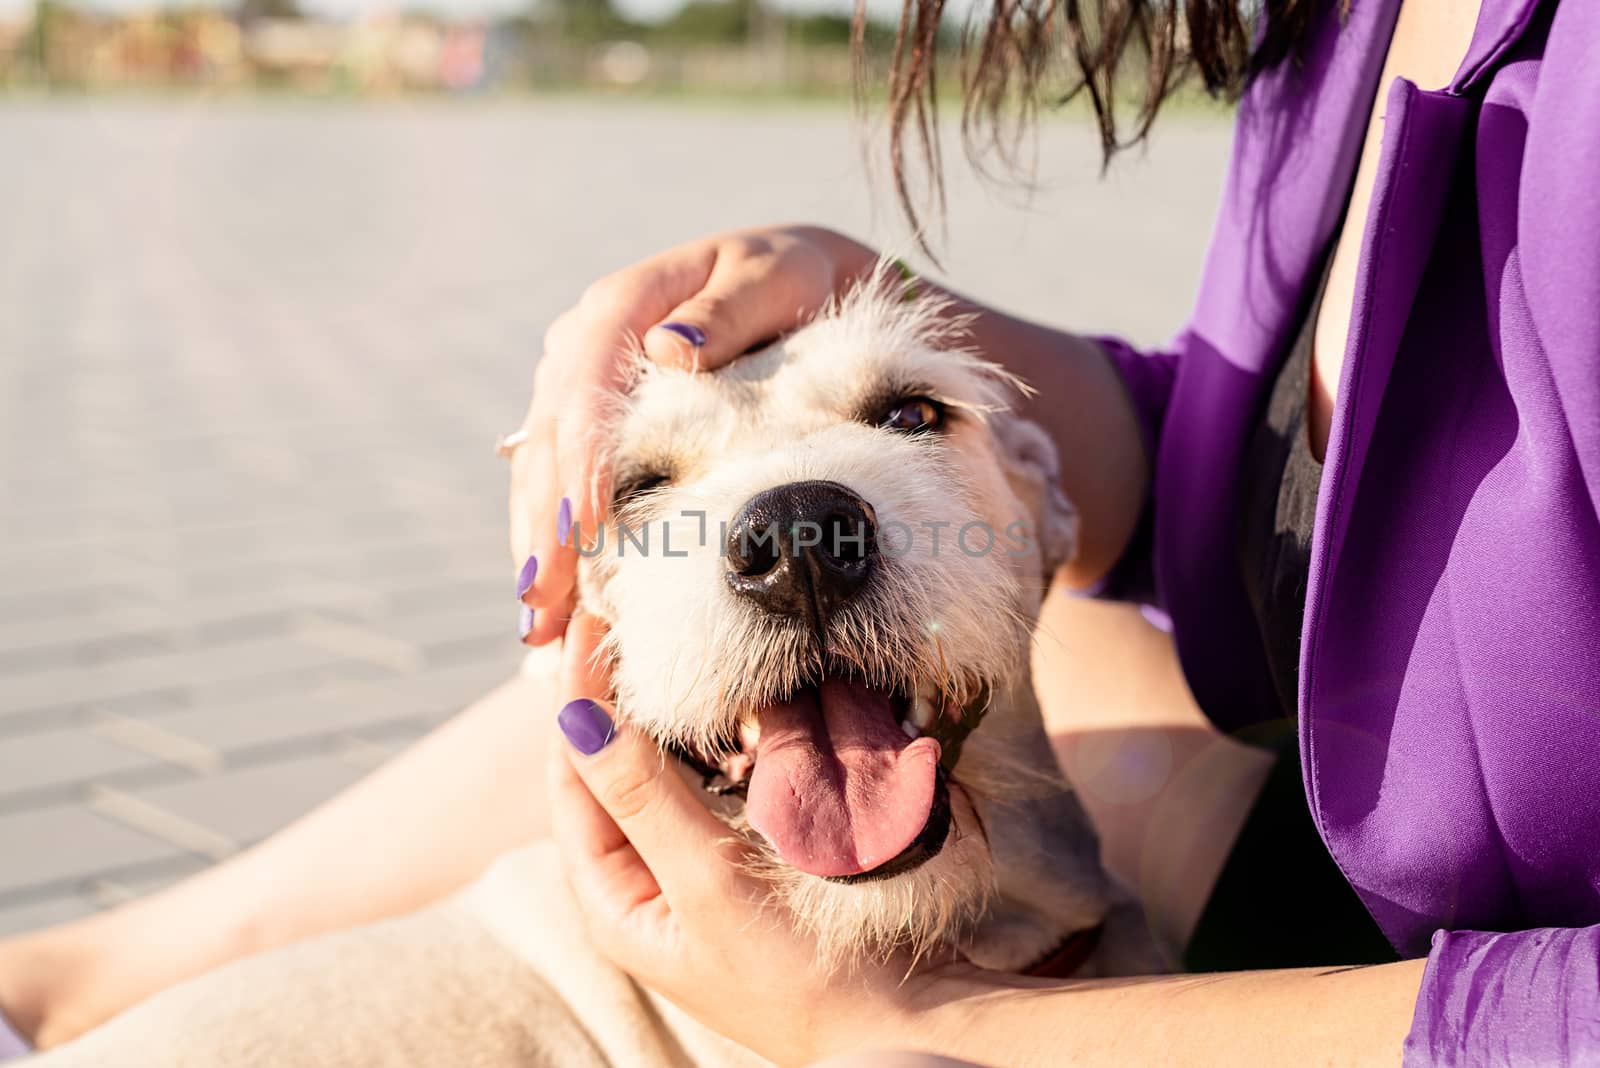 Pet care. Pet adoption. Young woman hugging her mixed breed dog